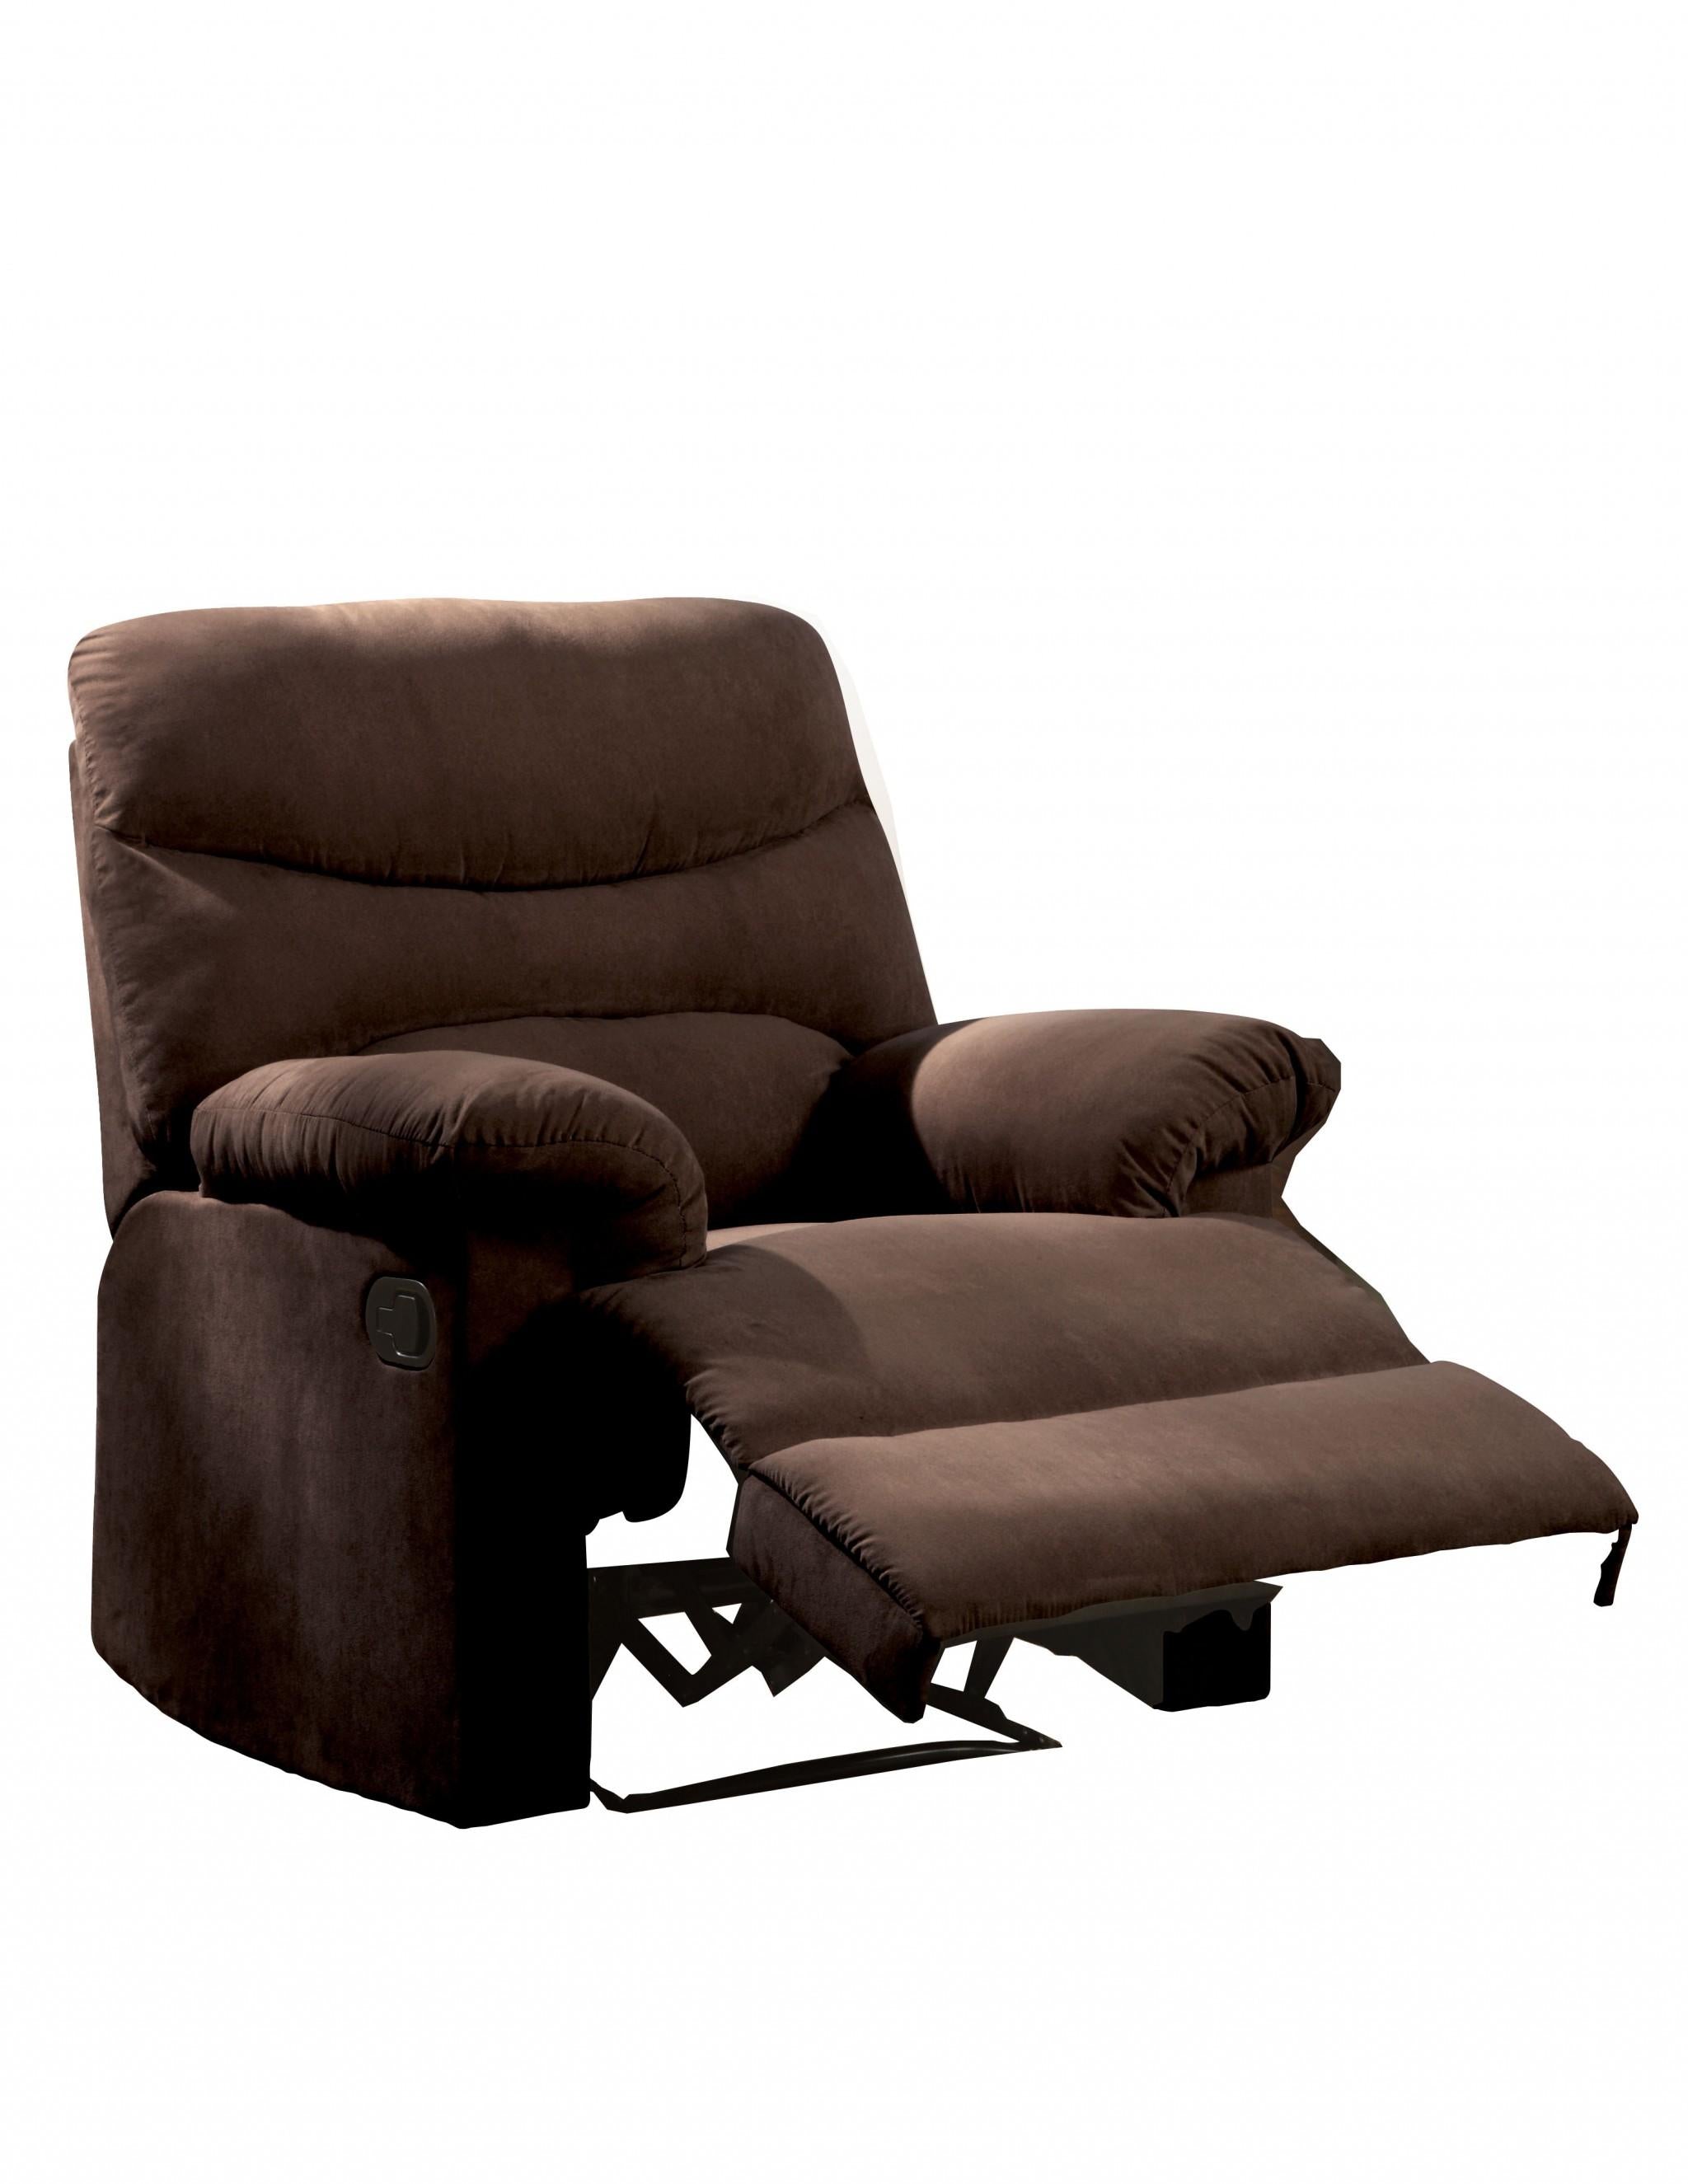 Microfiber Motion Recliner Chair in Chocolate